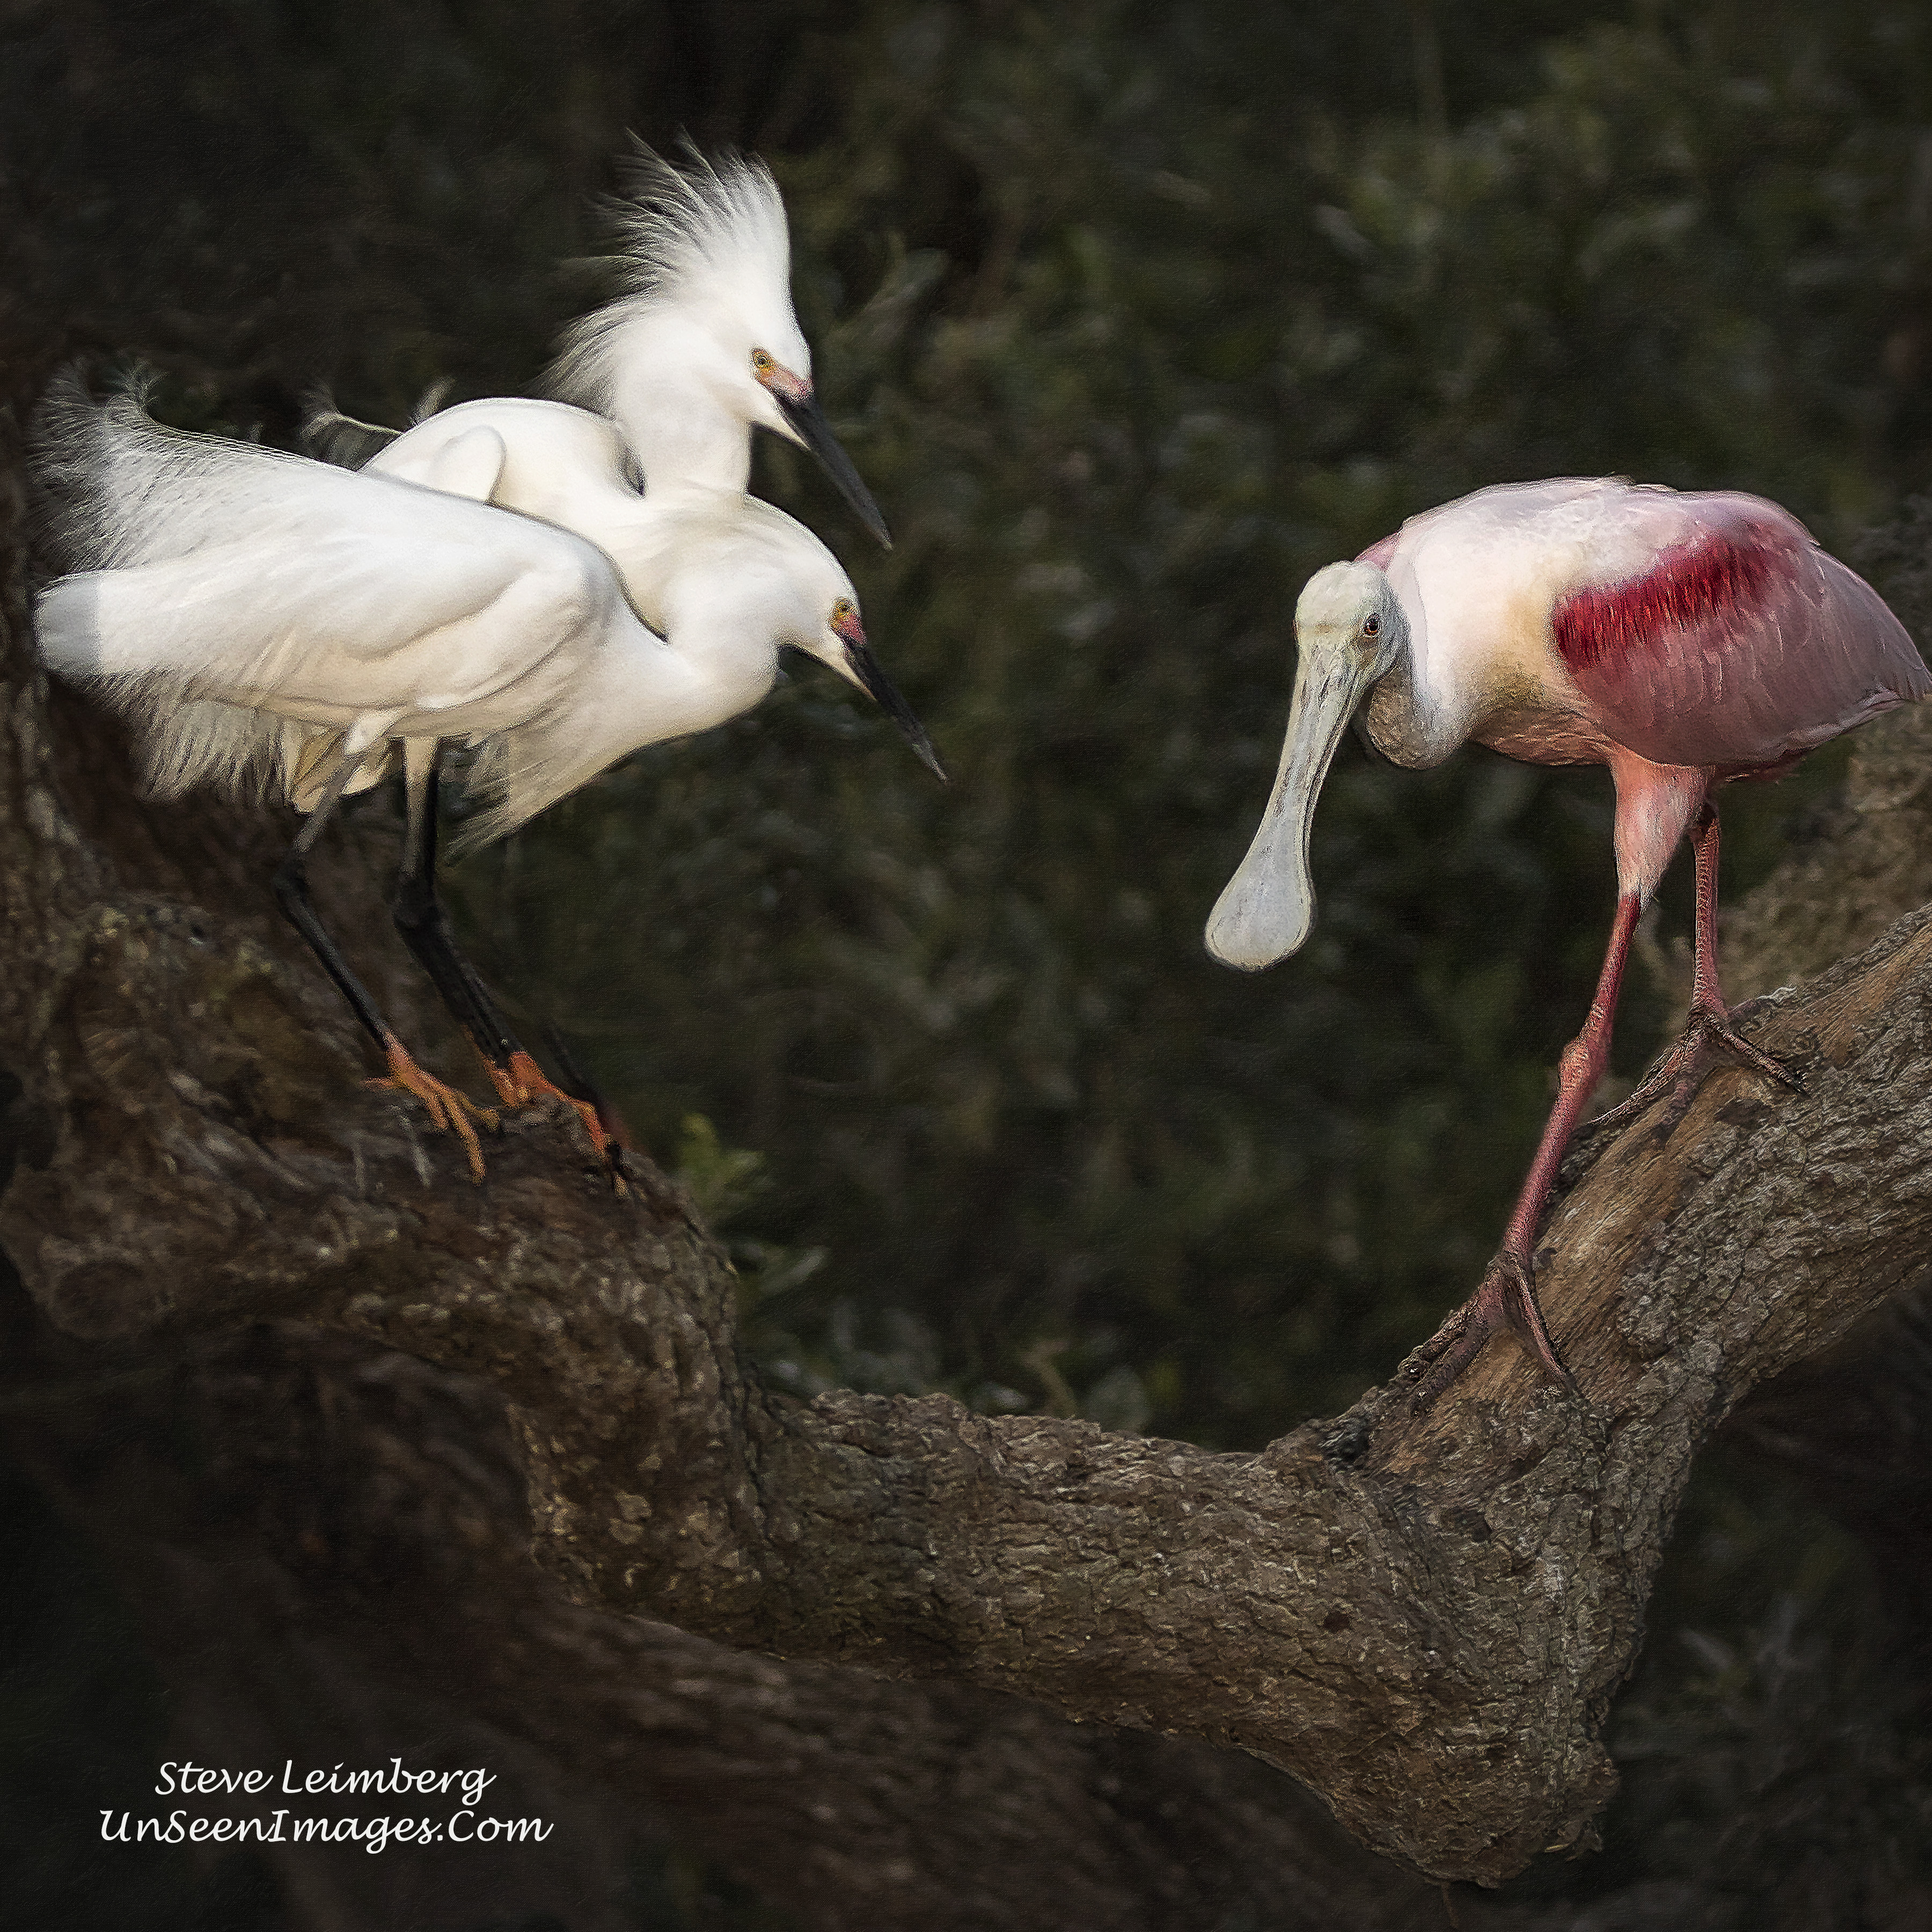 Confrontation-Roseate Spoonbill vs Two Snowy Egrets photo by Steve Leimberg UnseenImages.com